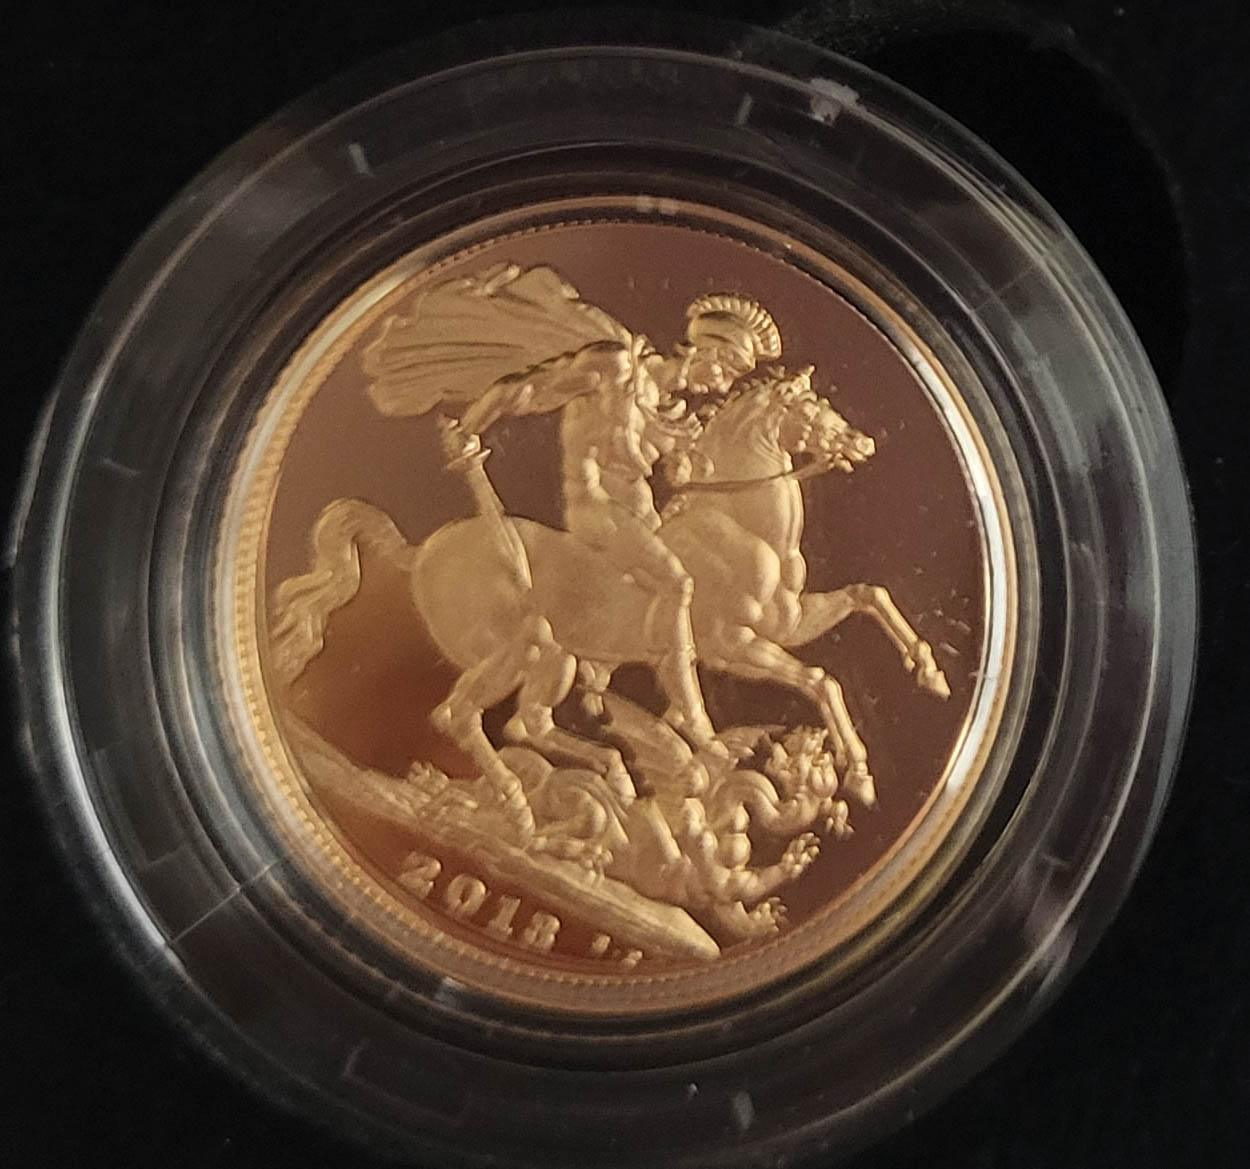 A 22CT GOLD FULL SOVEREIGN PROOF COIN, DATED 2013 With George and Dragon design to reverse, in a - Image 2 of 5